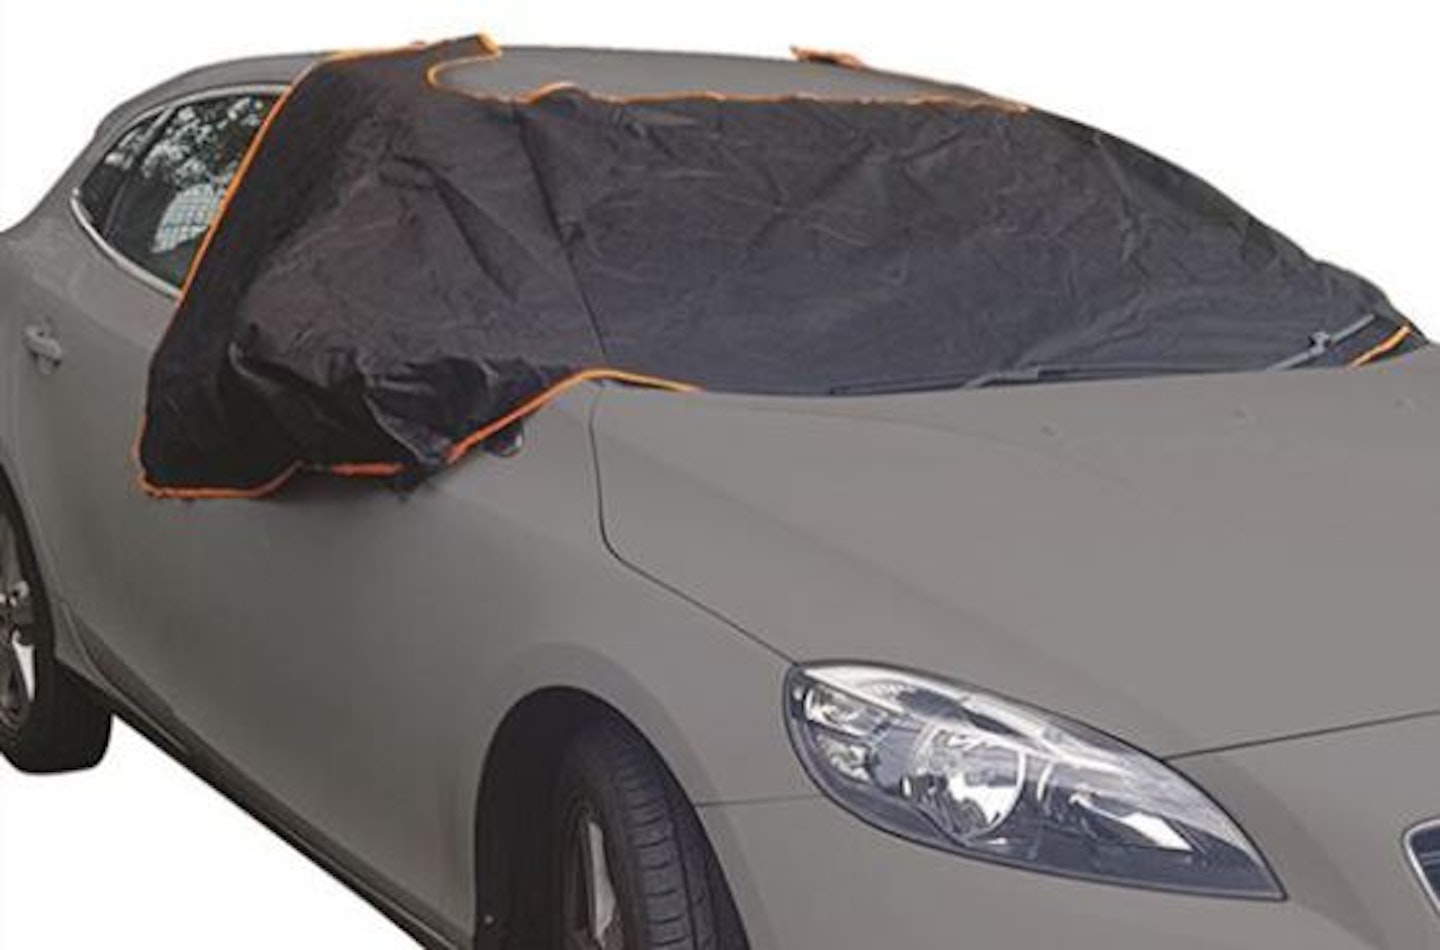 The Best Windscreen Covers For Heat And Frost Protection